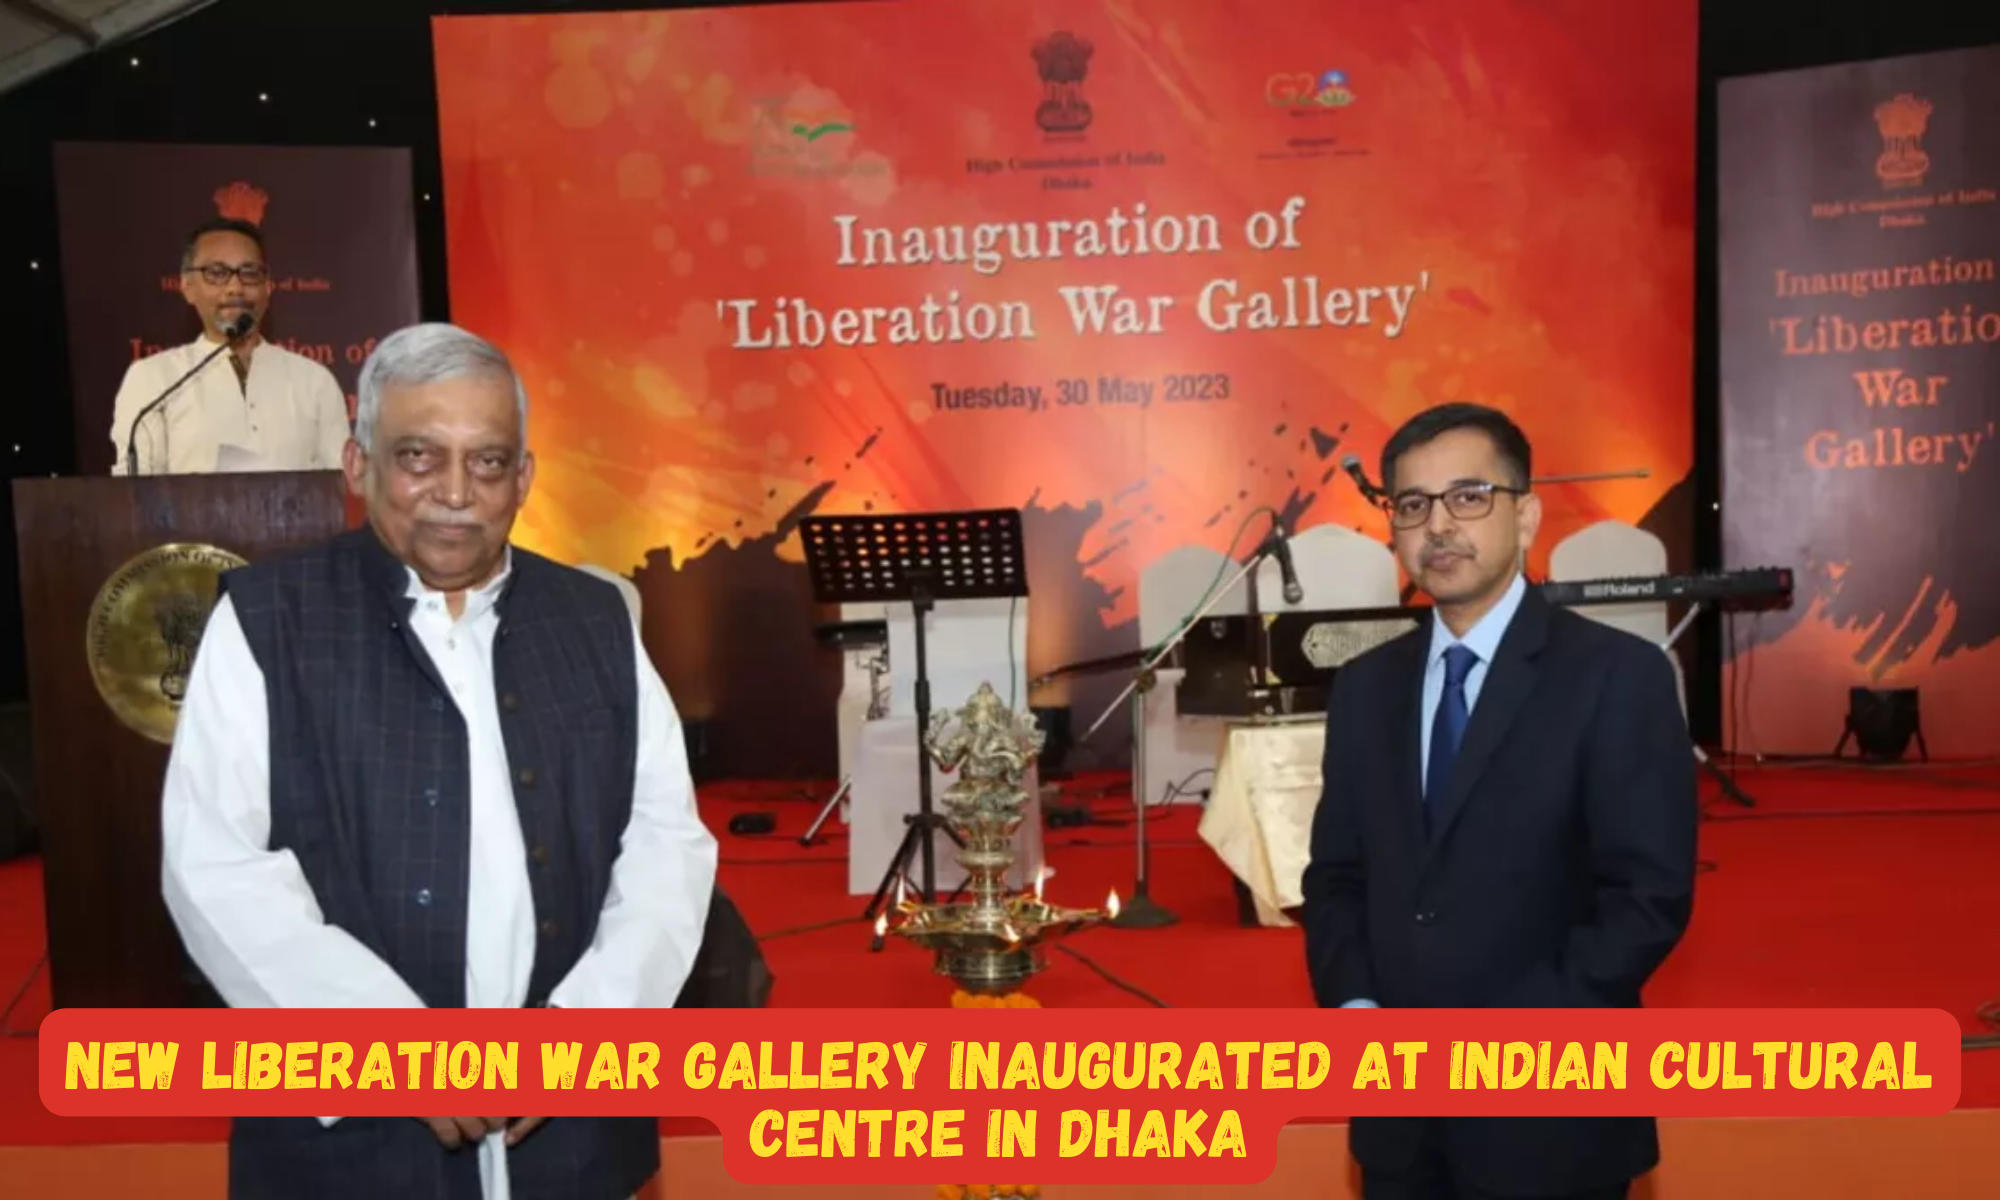 New Liberation War Gallery Inaugurated at Indian Cultural Centre in Dhaka